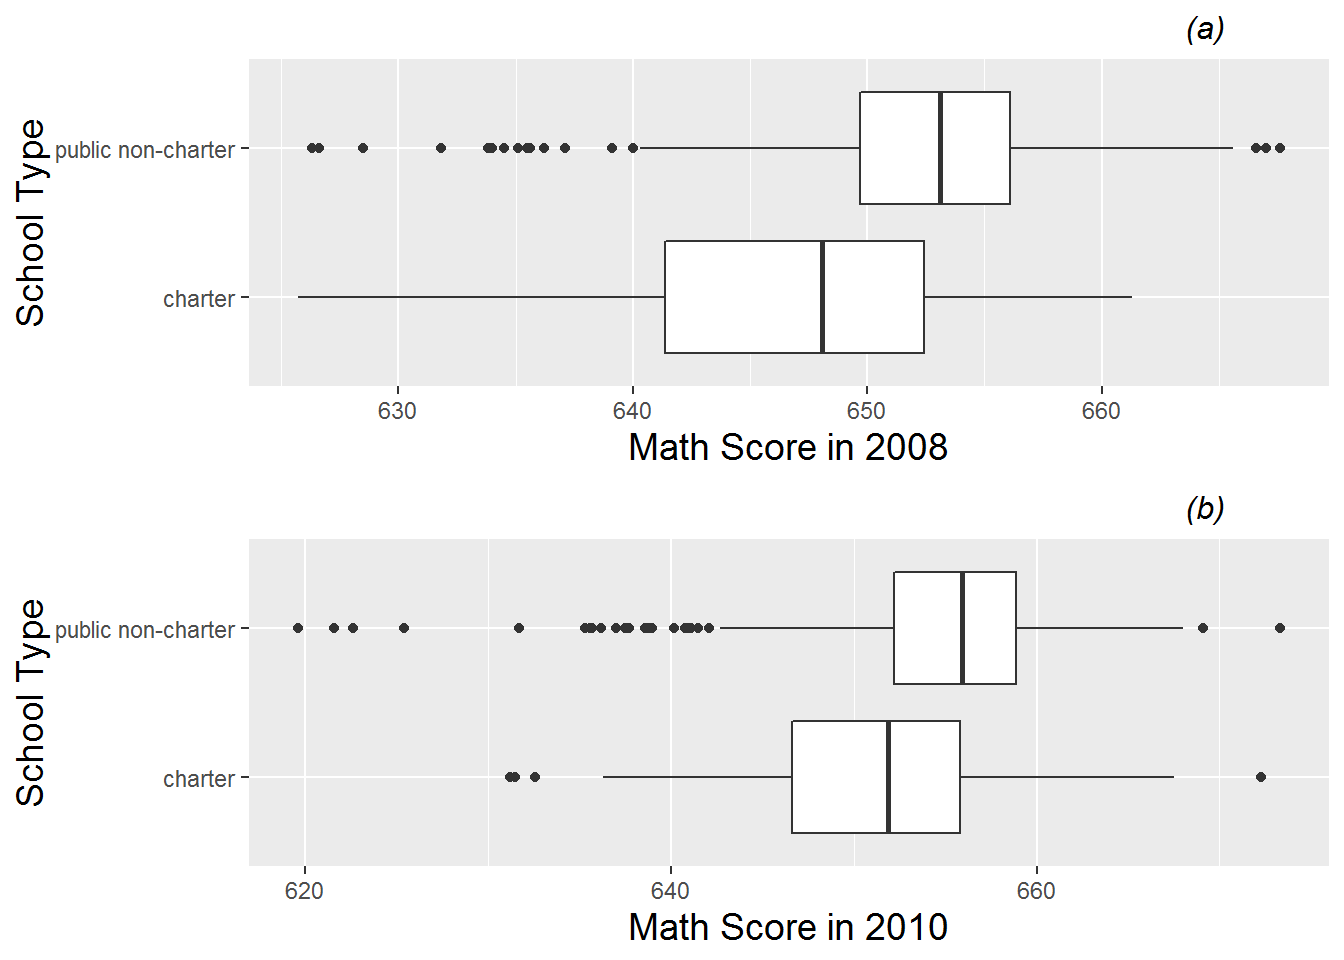 Boxplots of (a) 2008 and (b) 2010 math scores by school type (charter vs. public non-charter).